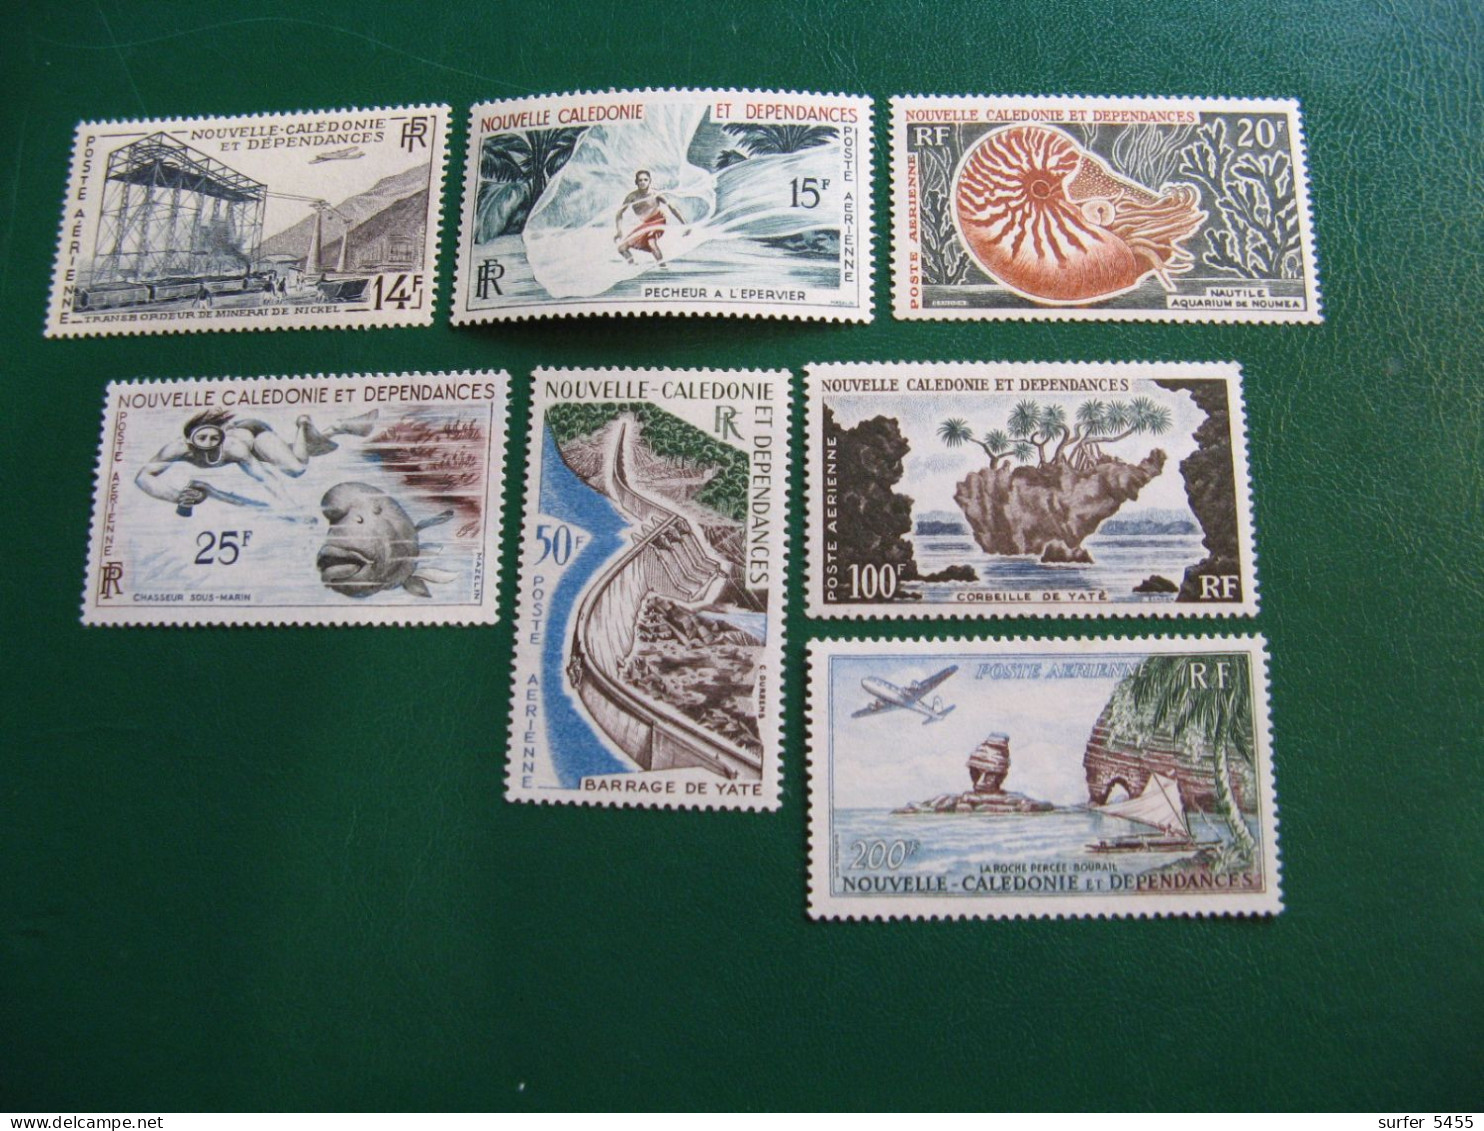 NOUVELLE CALEDONIE YVERT POSTE AERIENNE N° 66/72 TIMBRES NEUFS** LUXE - MNH - COTE 153,00 EUROS - Nuevos